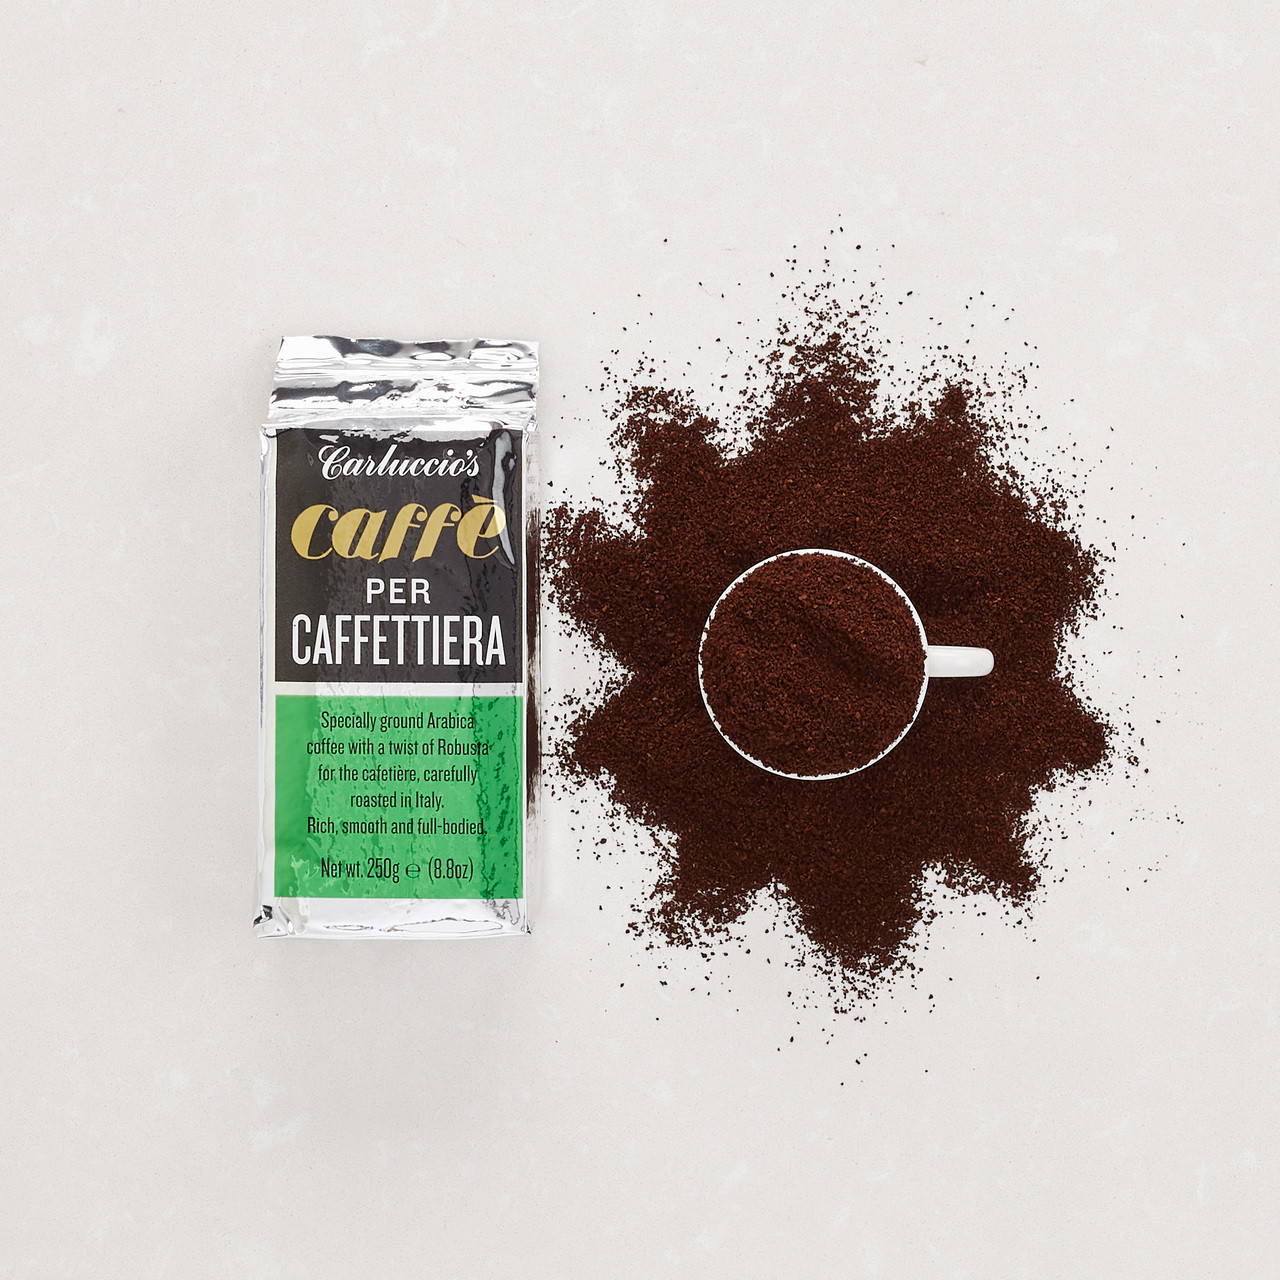 Cafetiere Ground Coffee sold at Carluccio's